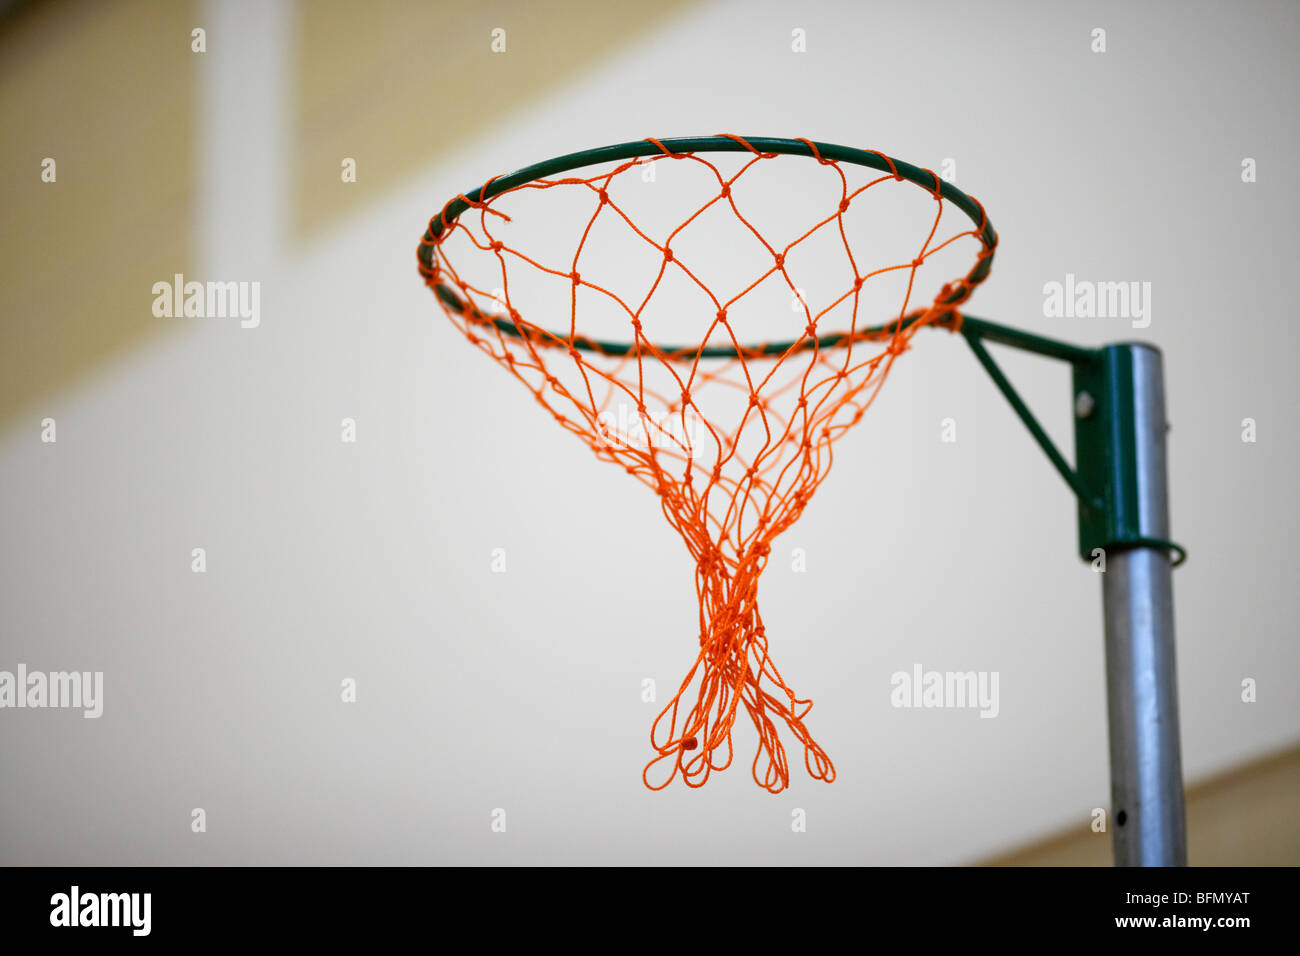 netball net in a school gym sports hall selective focus Stock Photo